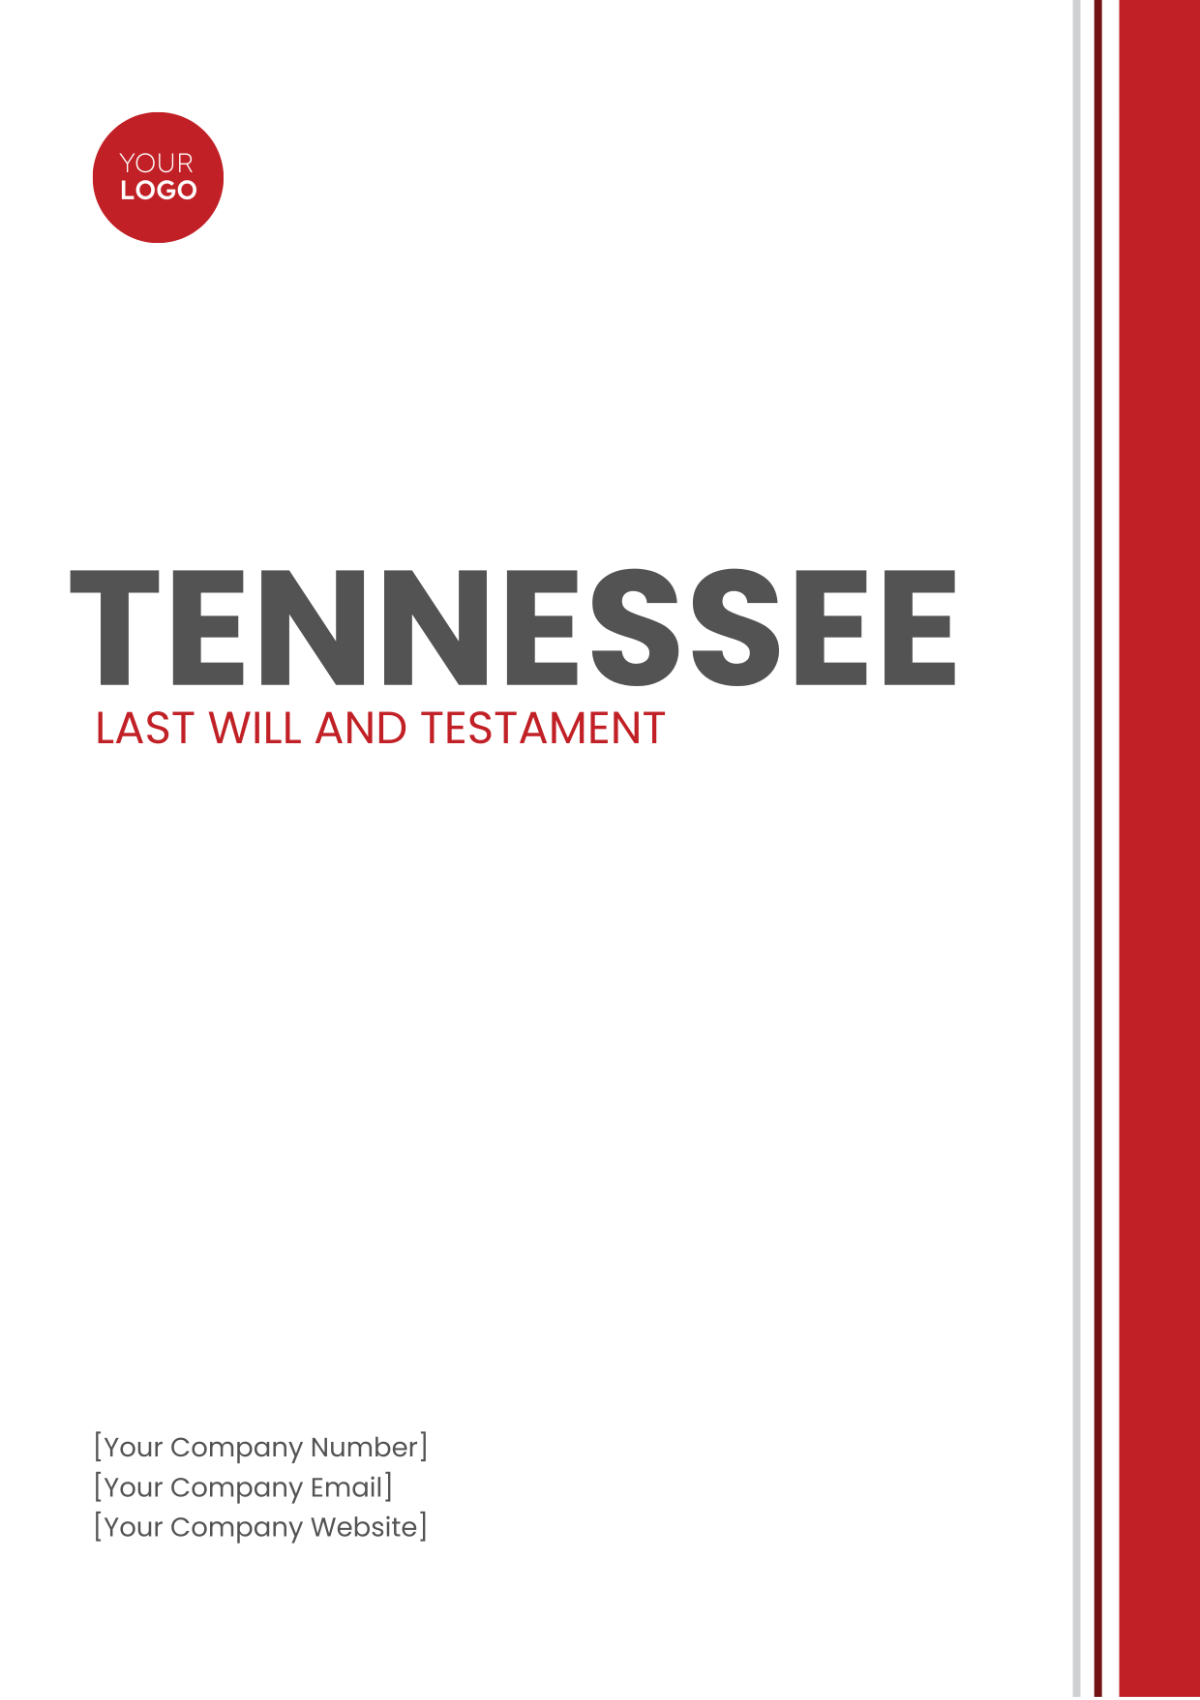 Tennessee Last Will and Testament Template